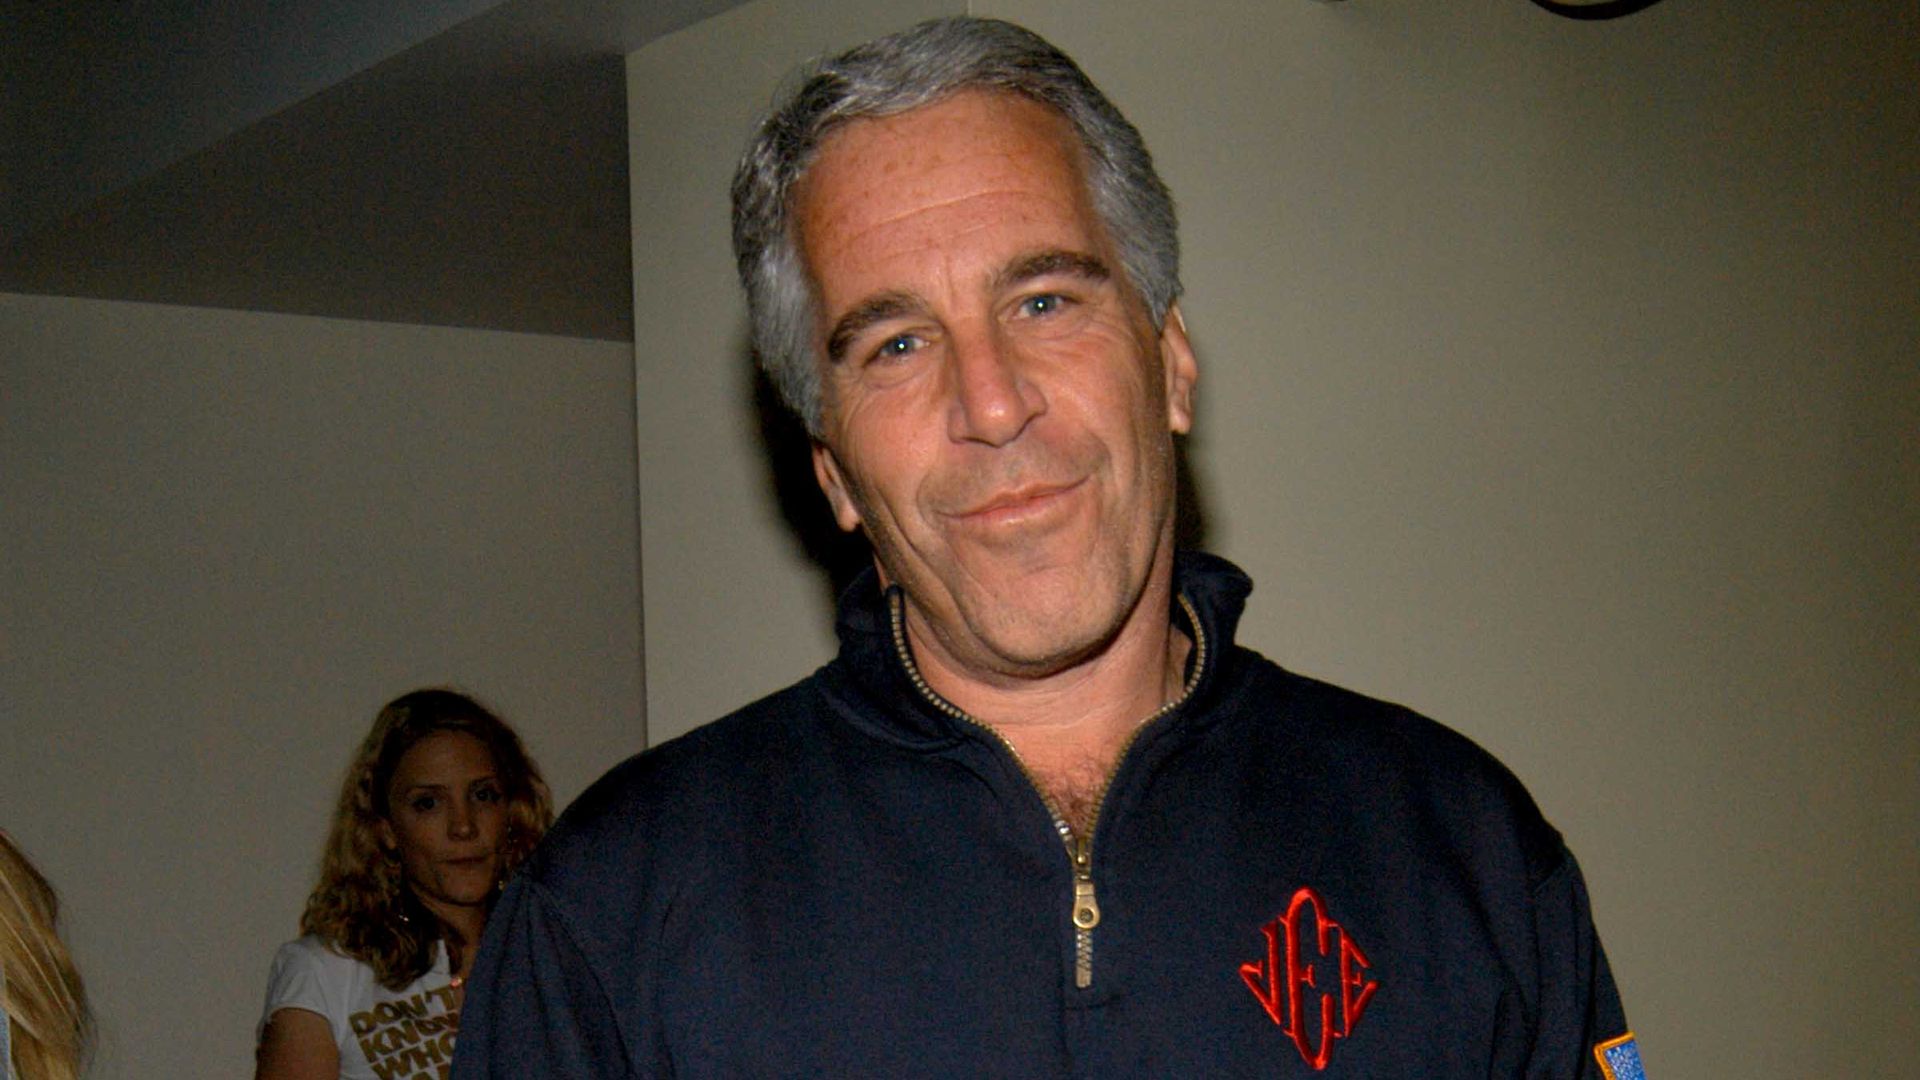 Jeffrey Epstein was convicted of soliciting was a girl who was 16 years old at the time the offenses began.